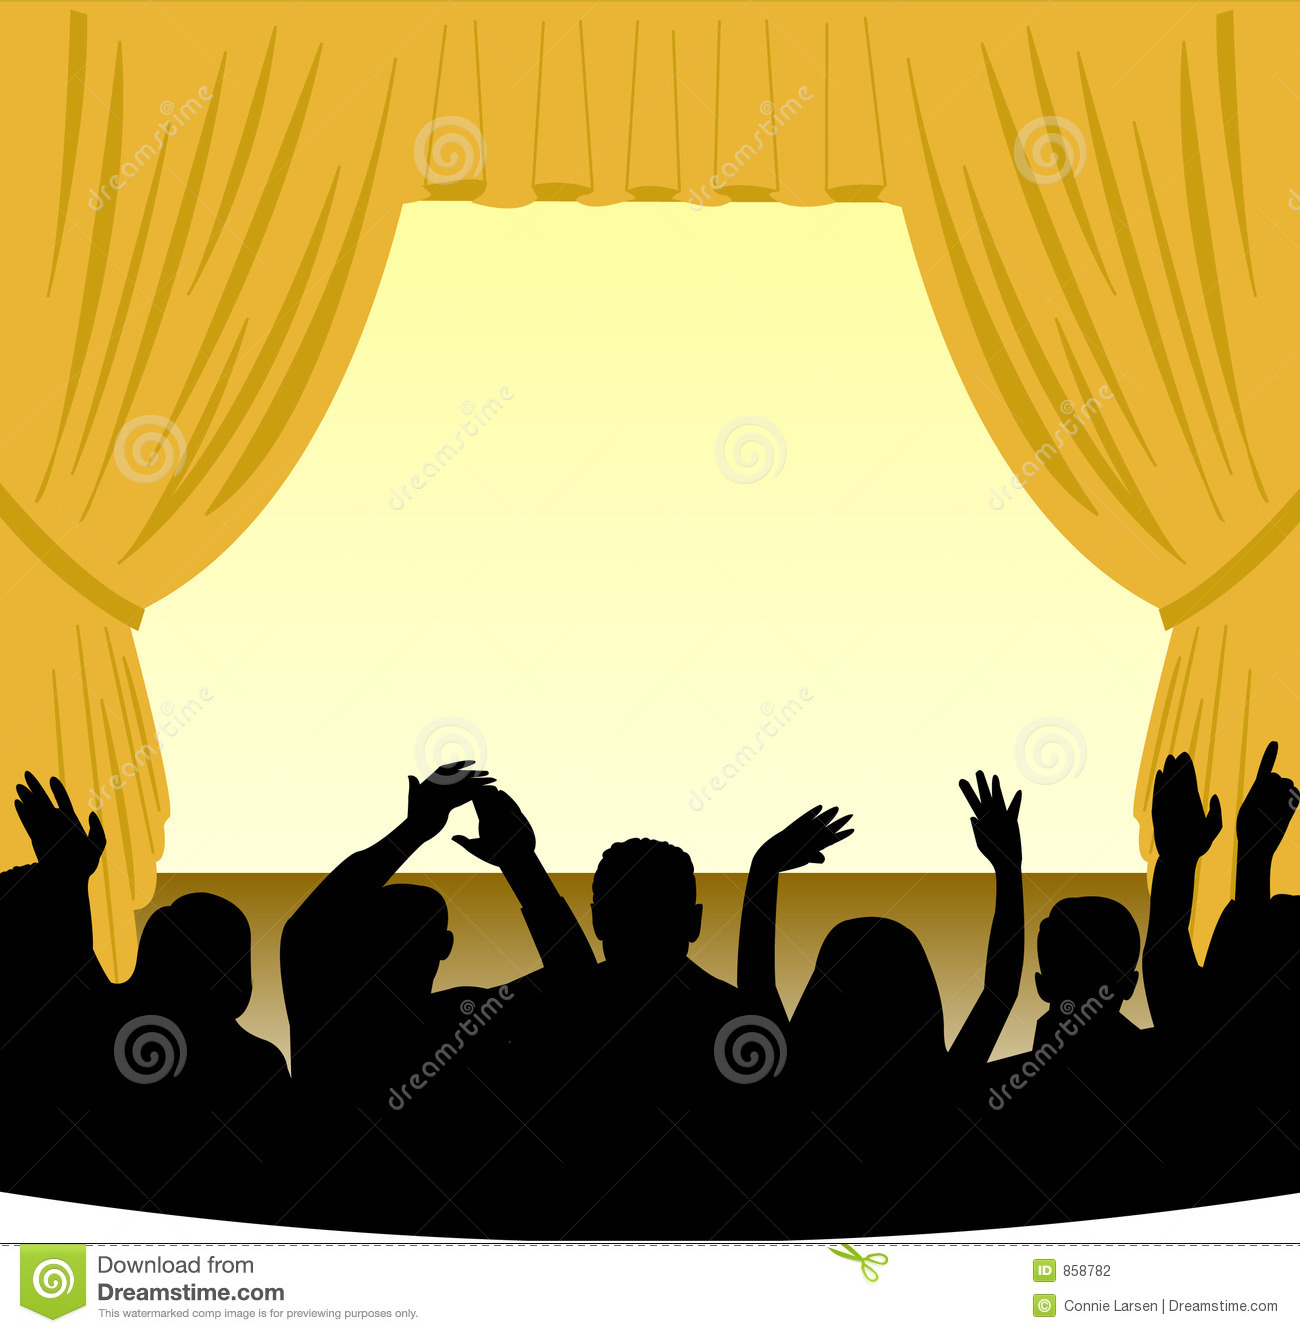 Of A Theater Stage With A Gold Curtain And An Audience In Silhouette